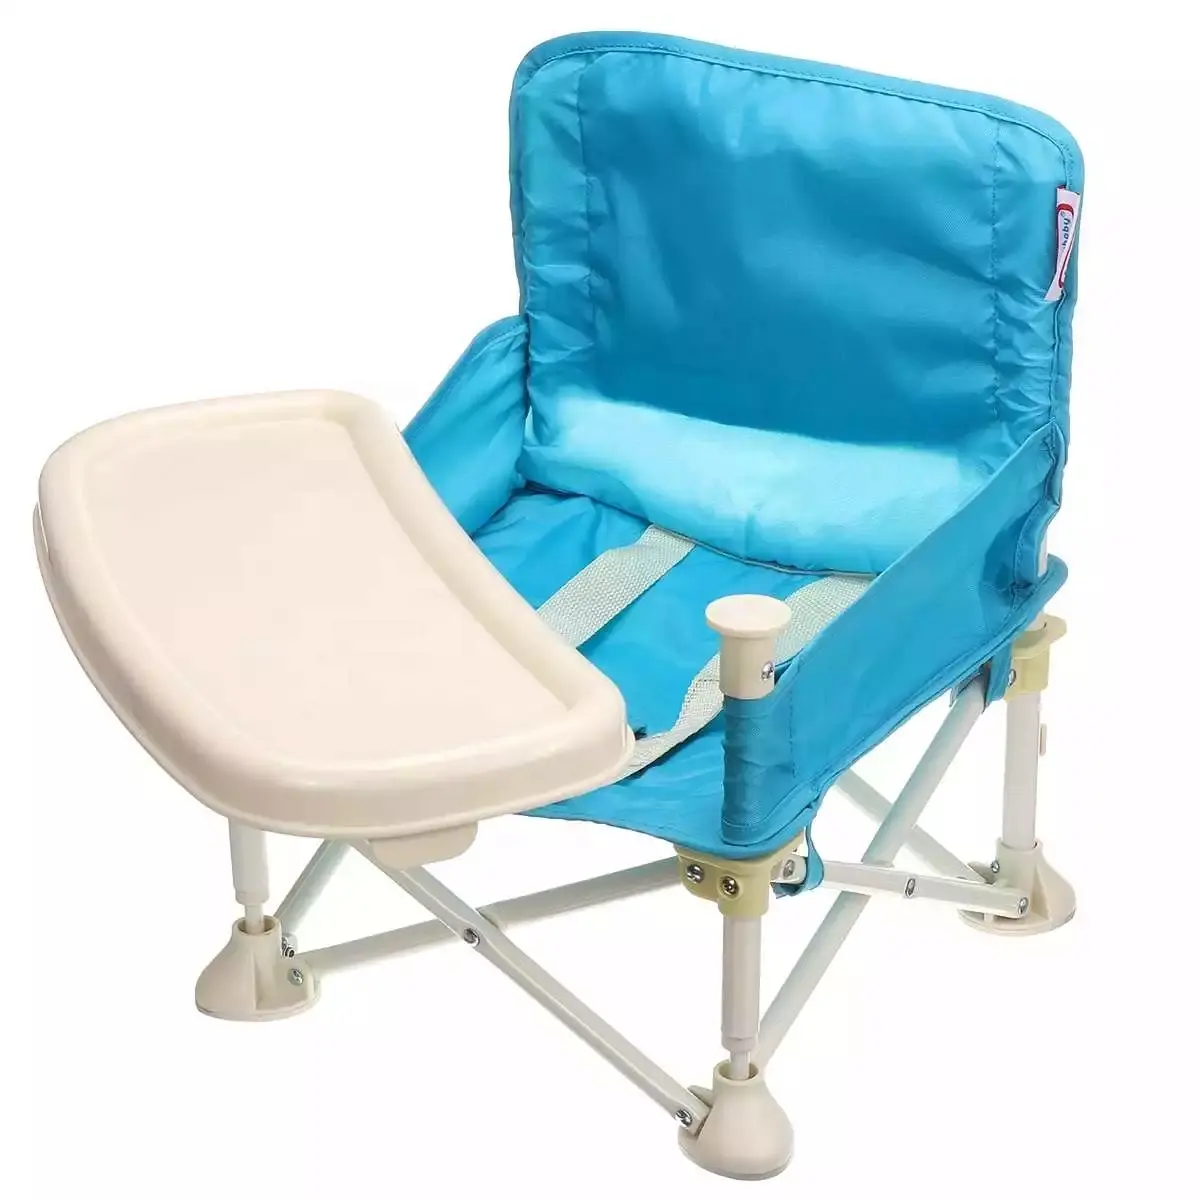 Travel Booster Seat with Tray for Baby Folding Portable High Chair for Eating, Camping, Beach, Lawn